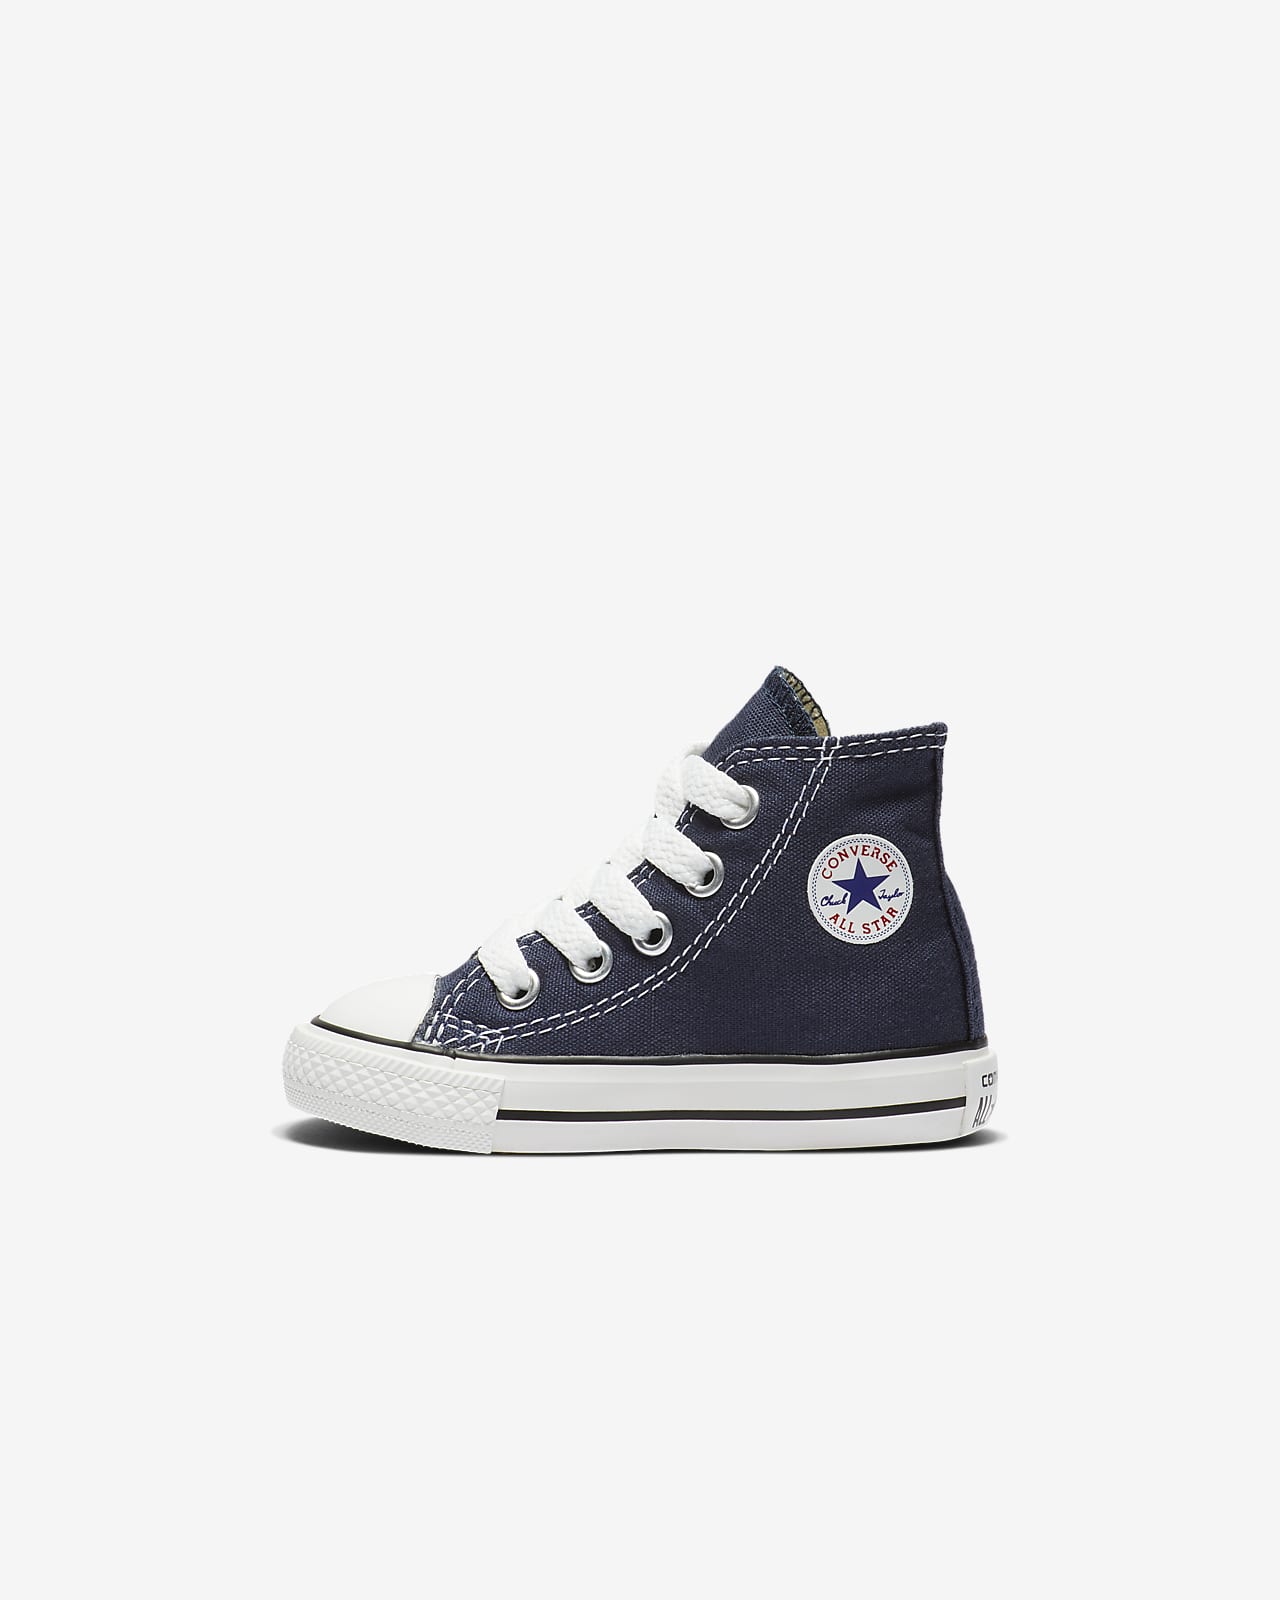 Converse Chuck Taylor All Star High Top (2c-10c) Infant/Toddler Shoe